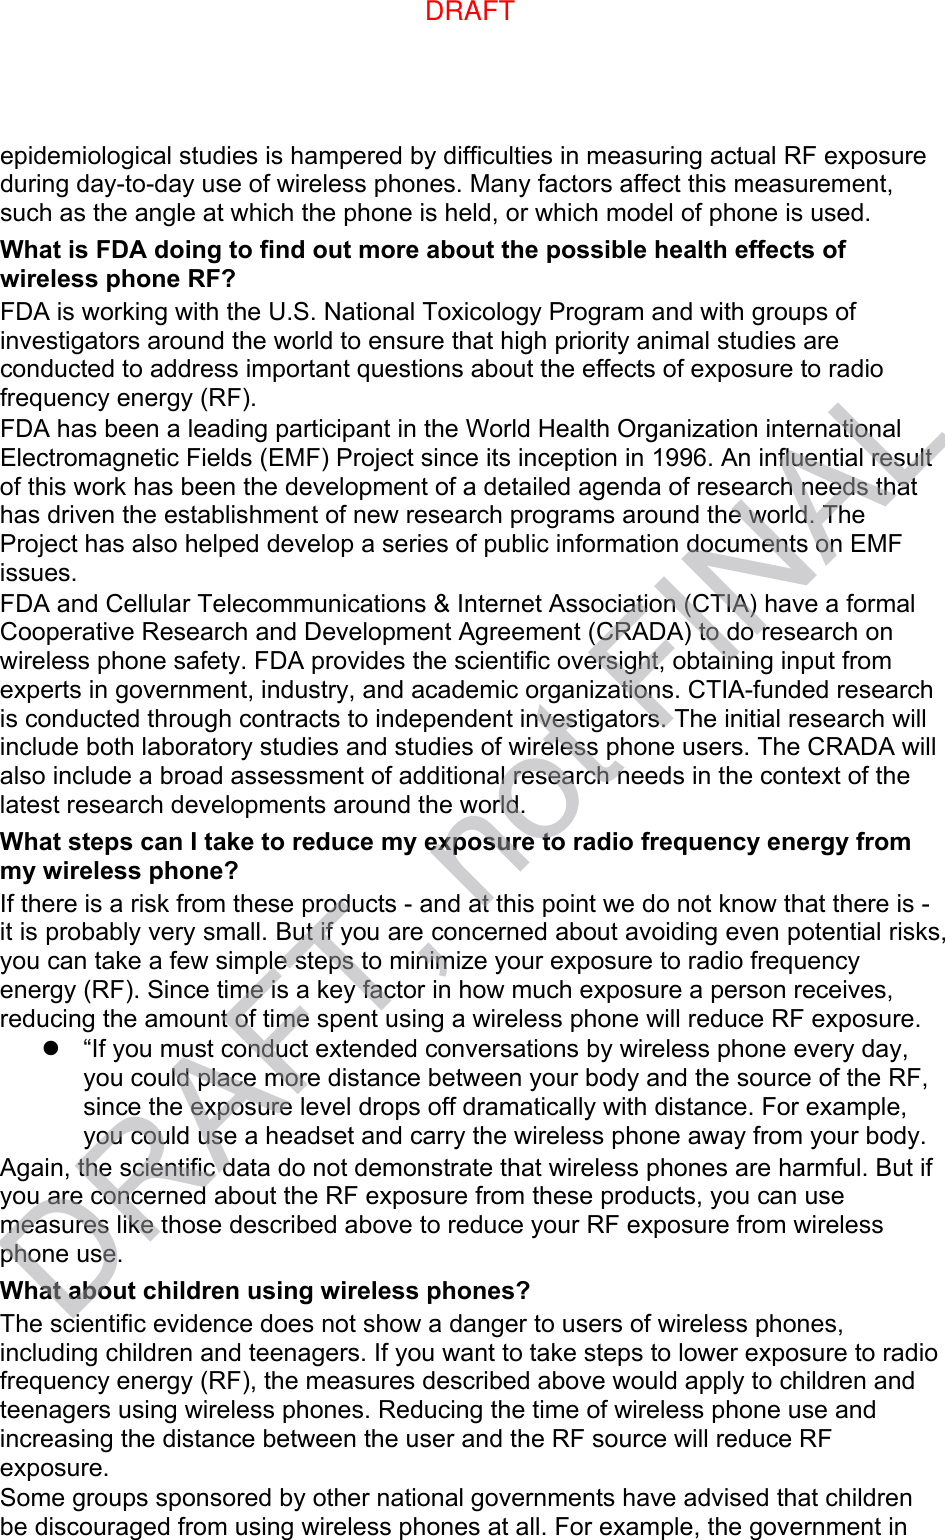 epidemiological studies is hampered by difficulties in measuring actual RF exposure during day-to-day use of wireless phones. Many factors affect this measurement, such as the angle at which the phone is held, or which model of phone is used. What is FDA doing to find out more about the possible health effects of wireless phone RF? FDA is working with the U.S. National Toxicology Program and with groups of investigators around the world to ensure that high priority animal studies are conducted to address important questions about the effects of exposure to radio frequency energy (RF). FDA has been a leading participant in the World Health Organization international Electromagnetic Fields (EMF) Project since its inception in 1996. An influential result of this work has been the development of a detailed agenda of research needs that has driven the establishment of new research programs around the world. The Project has also helped develop a series of public information documents on EMF issues. FDA and Cellular Telecommunications &amp; Internet Association (CTIA) have a formal Cooperative Research and Development Agreement (CRADA) to do research on wireless phone safety. FDA provides the scientific oversight, obtaining input from experts in government, industry, and academic organizations. CTIA-funded research is conducted through contracts to independent investigators. The initial research will include both laboratory studies and studies of wireless phone users. The CRADA will also include a broad assessment of additional research needs in the context of the latest research developments around the world. What steps can I take to reduce my exposure to radio frequency energy from my wireless phone? If there is a risk from these products - and at this point we do not know that there is - it is probably very small. But if you are concerned about avoiding even potential risks, you can take a few simple steps to minimize your exposure to radio frequency energy (RF). Since time is a key factor in how much exposure a person receives, reducing the amount of time spent using a wireless phone will reduce RF exposure. “If you must conduct extended conversations by wireless phone every day,you could place more distance between your body and the source of the RF,since the exposure level drops off dramatically with distance. For example,you could use a headset and carry the wireless phone away from your body.Again, the scientific data do not demonstrate that wireless phones are harmful. But if you are concerned about the RF exposure from these products, you can use measures like those described above to reduce your RF exposure from wireless phone use. What about children using wireless phones? The scientific evidence does not show a danger to users of wireless phones, including children and teenagers. If you want to take steps to lower exposure to radio frequency energy (RF), the measures described above would apply to children and teenagers using wireless phones. Reducing the time of wireless phone use and increasing the distance between the user and the RF source will reduce RF exposure. Some groups sponsored by other national governments have advised that children be discouraged from using wireless phones at all. For example, the government in DRAFT, not FINALDRAFT